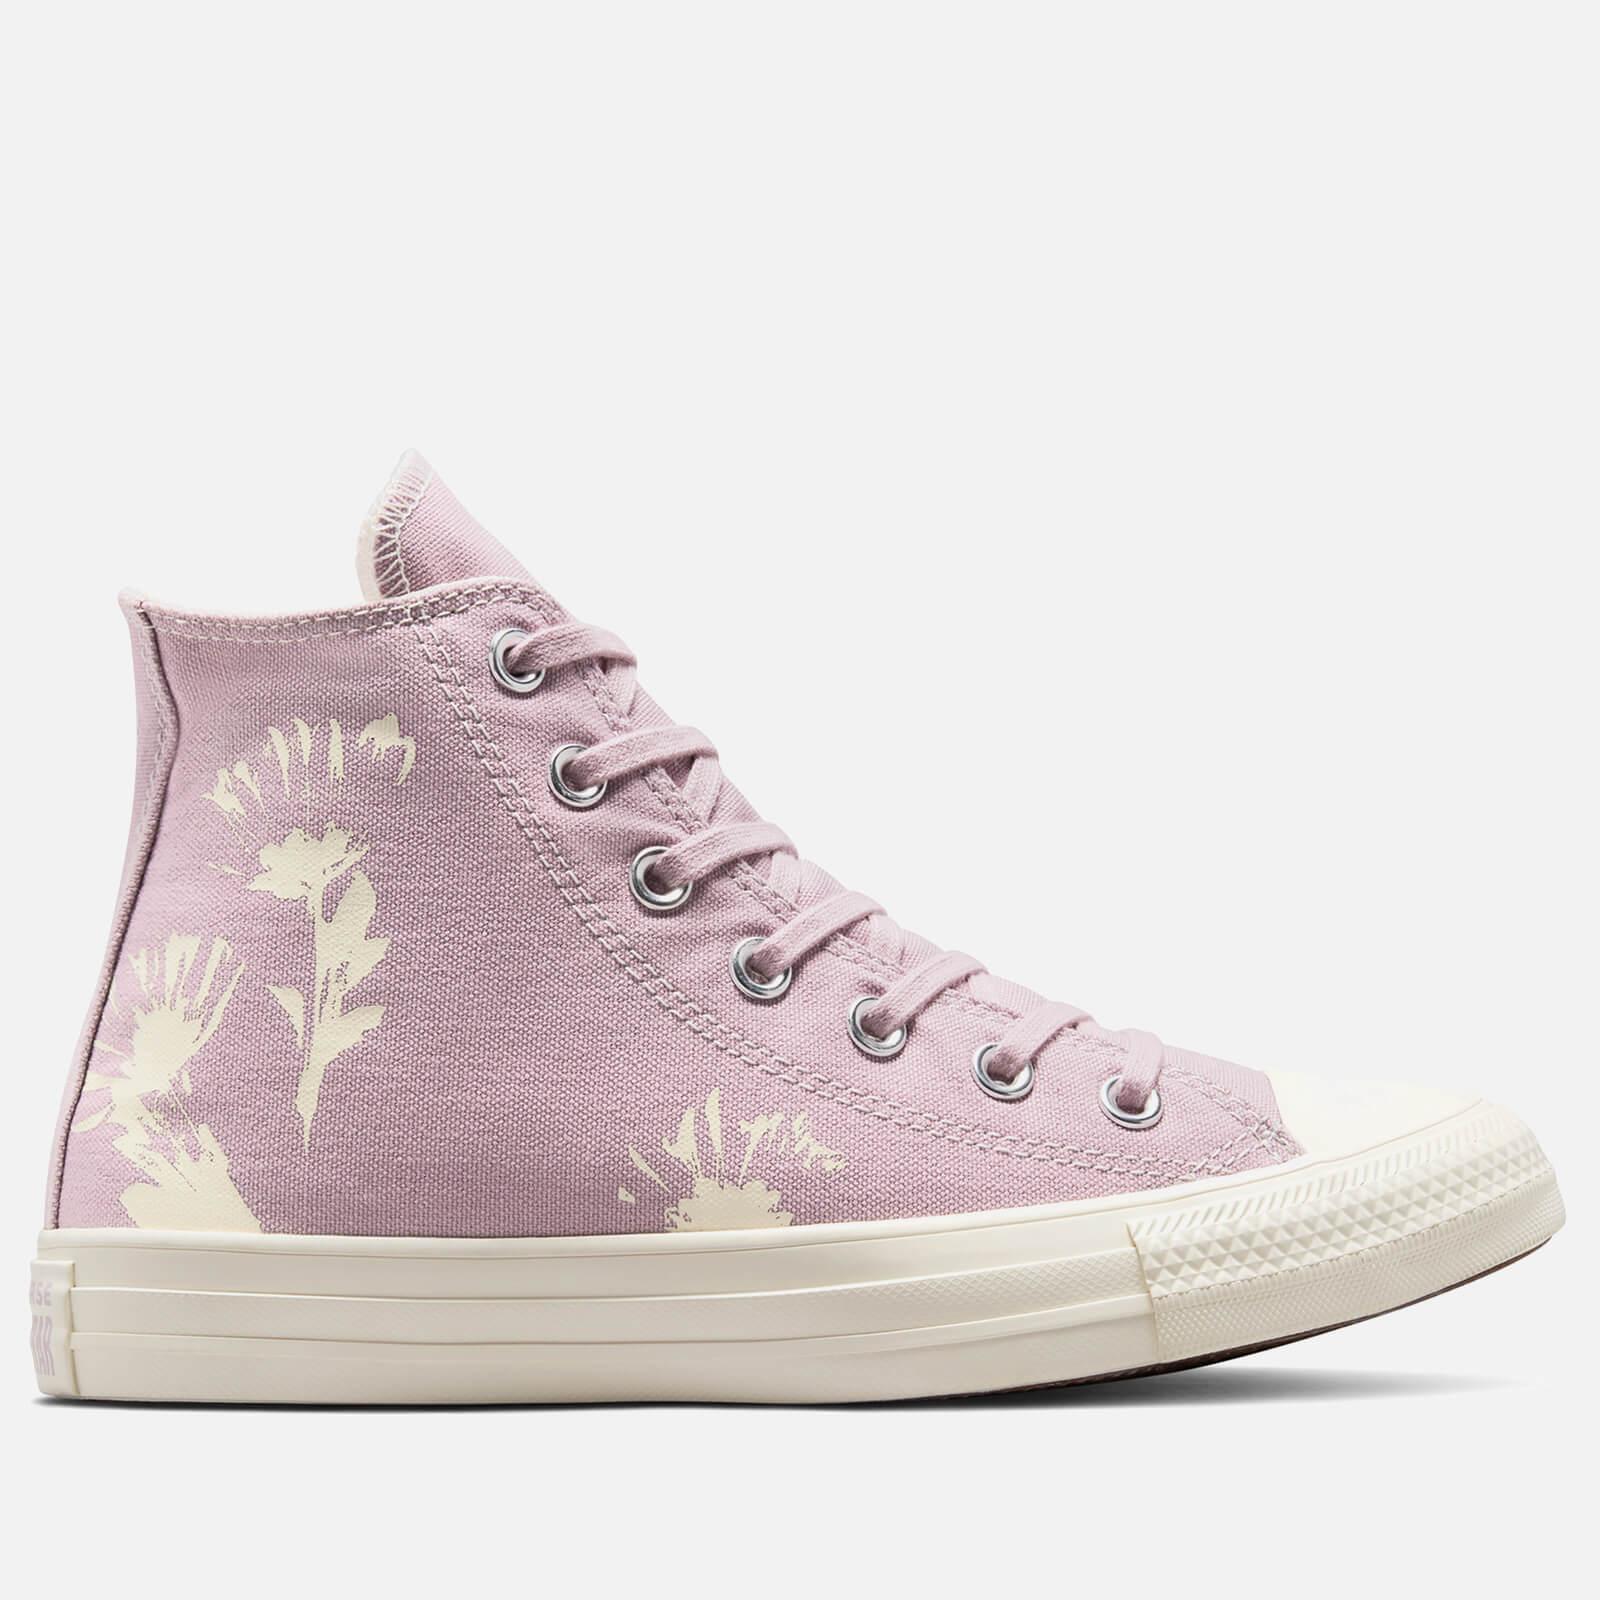 Converse Chuck Taylor All Star Hybrid Floral Hi-top Trainers in Pink | Lyst